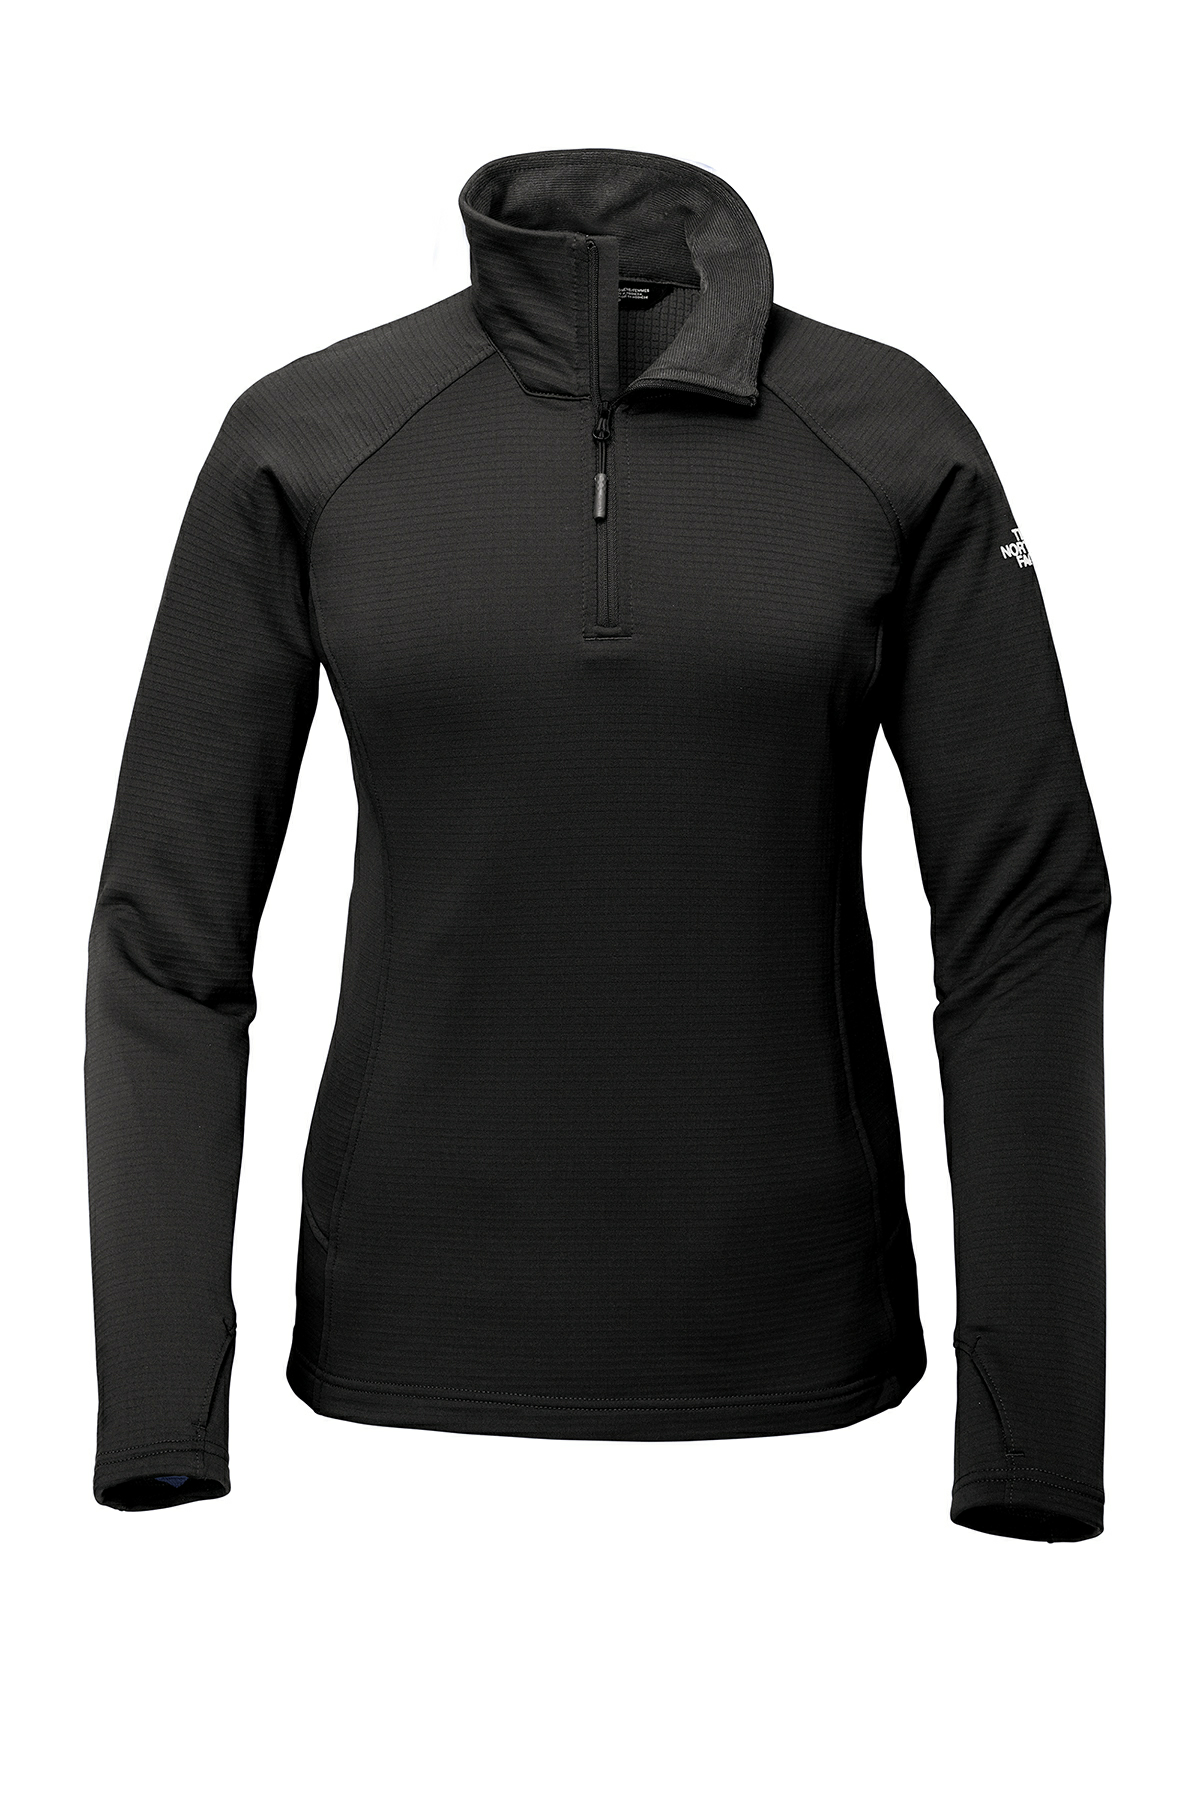 The North Face - Mountain Peaks Tech Stretch Pullover - Ladies